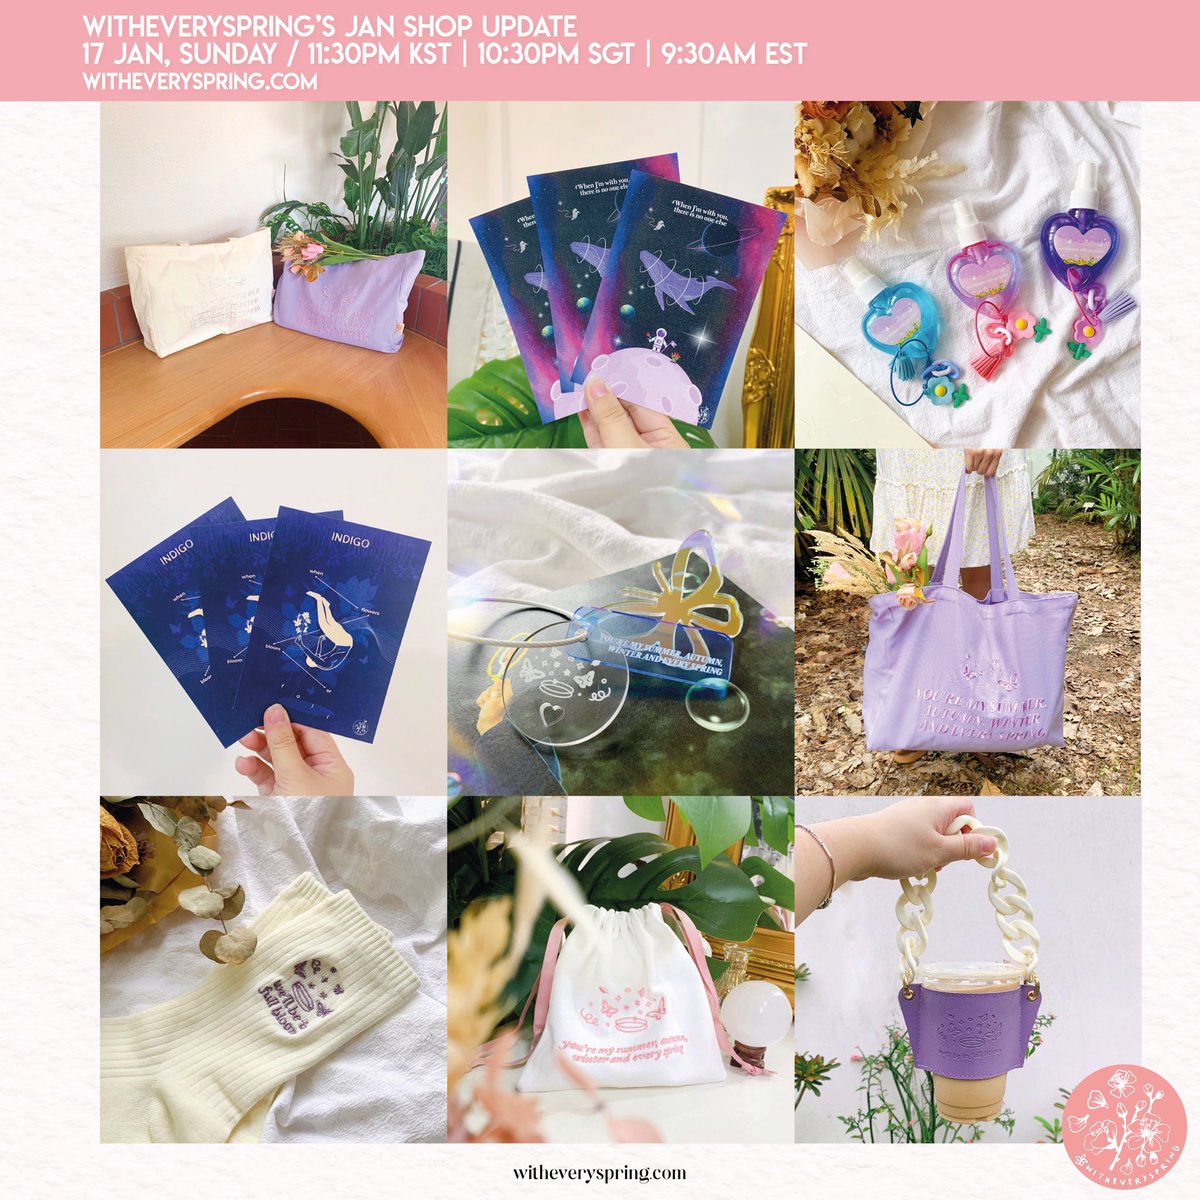 PH GO 🇵🇭 #INPHGOS
Please help RT 🙏🏼

[IN645] @witheveryspring 2023 SHOP UPDATE

🗒 Details are in the link below
📝 DOO: JAN 28
📅 DOP: JAN 28, 5PM
⛴ Normal ETA, from SINGAPORE

ORDER HERE: docs.google.com/forms/d/e/1FAI…